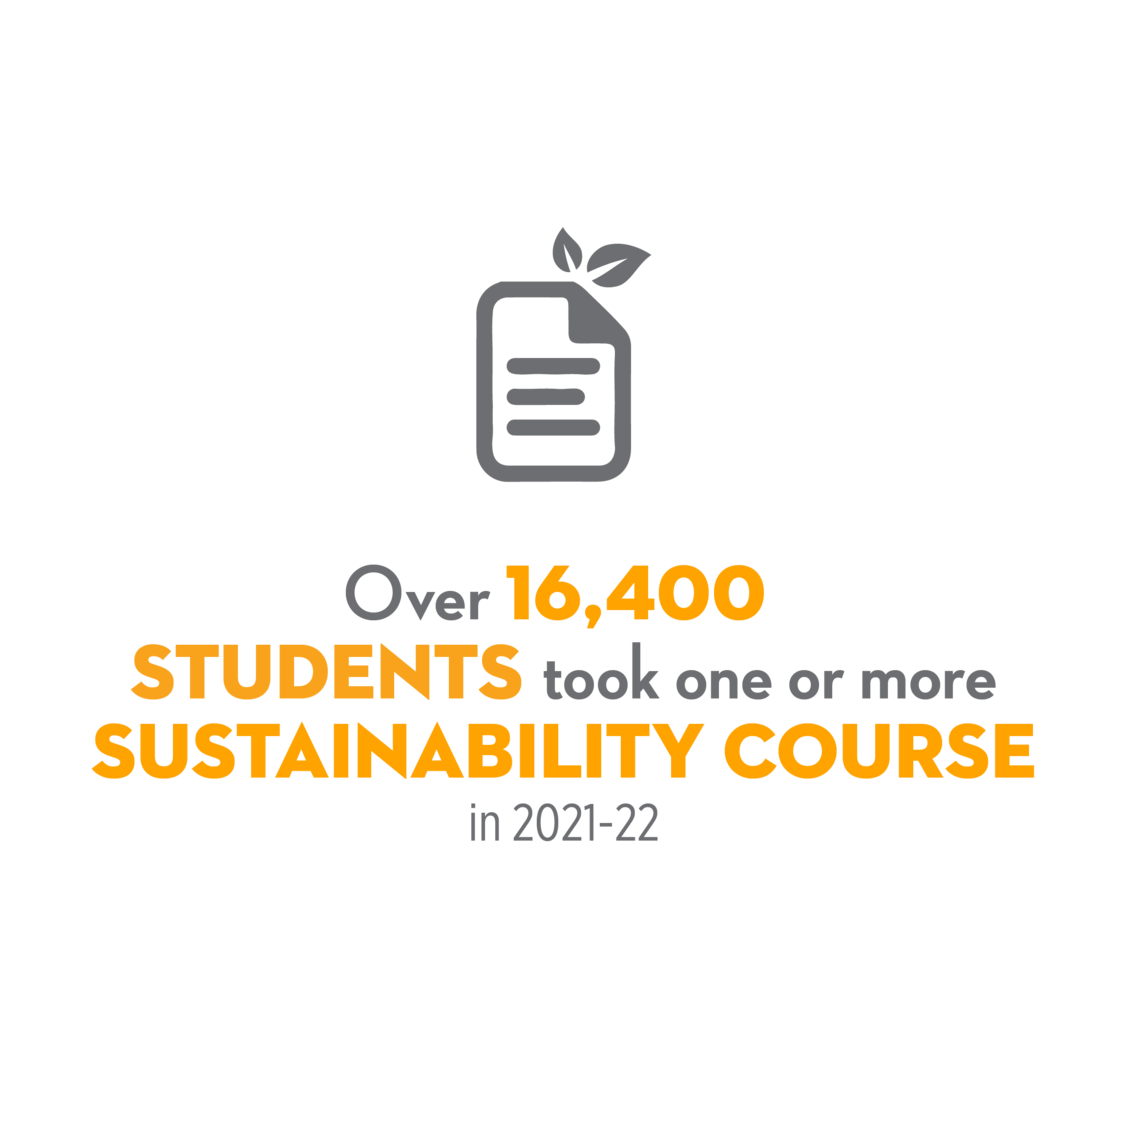 Over 16,400 students took one or more sustainability courses in 2021-22.